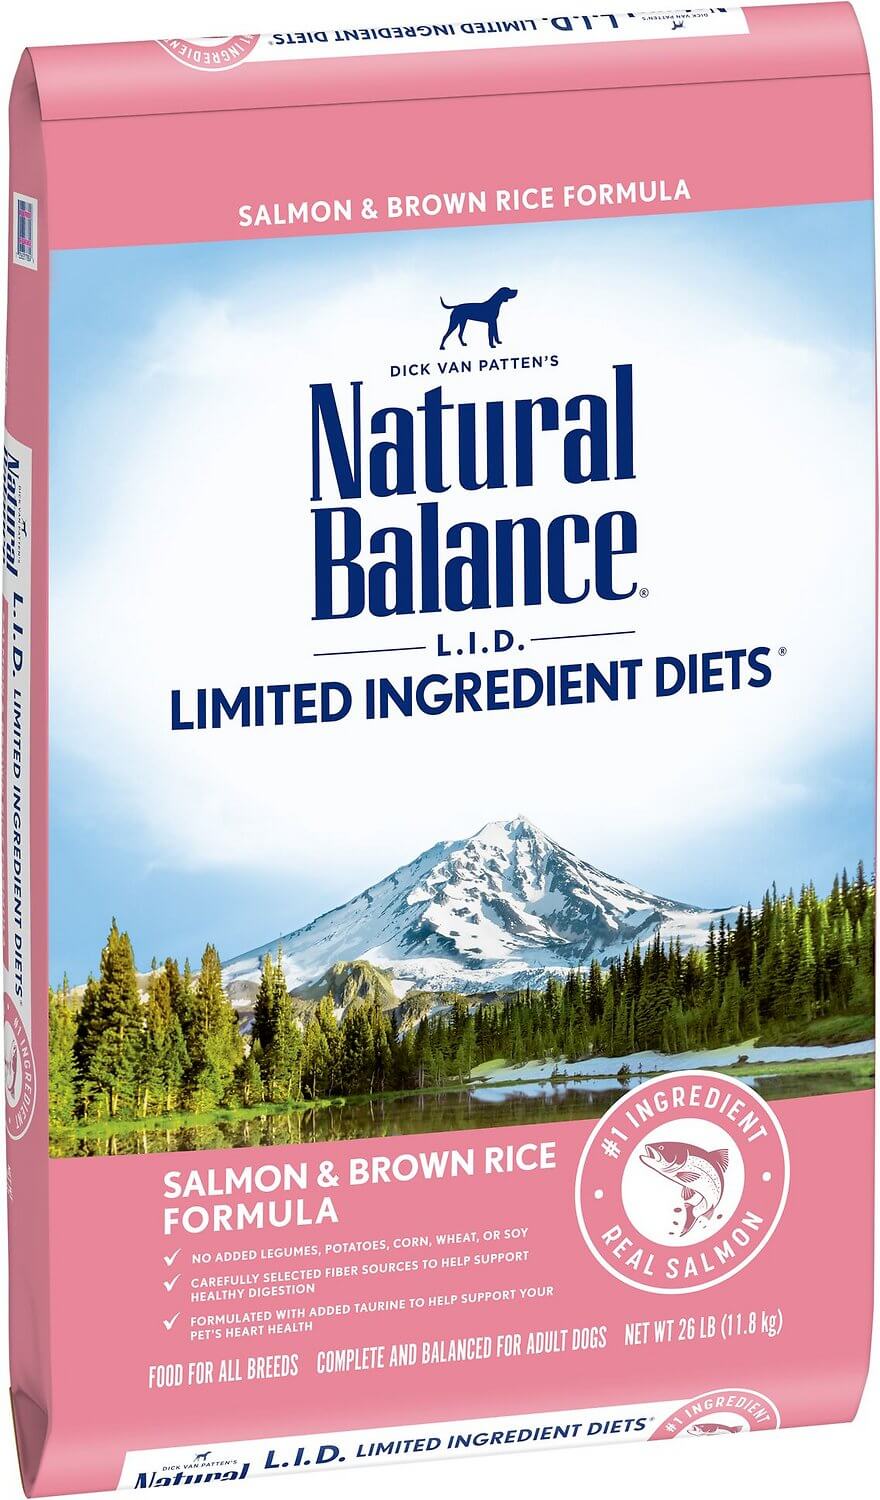 Natural Balance Limited Ingredient Diets - Best Dog Foods for Allergies